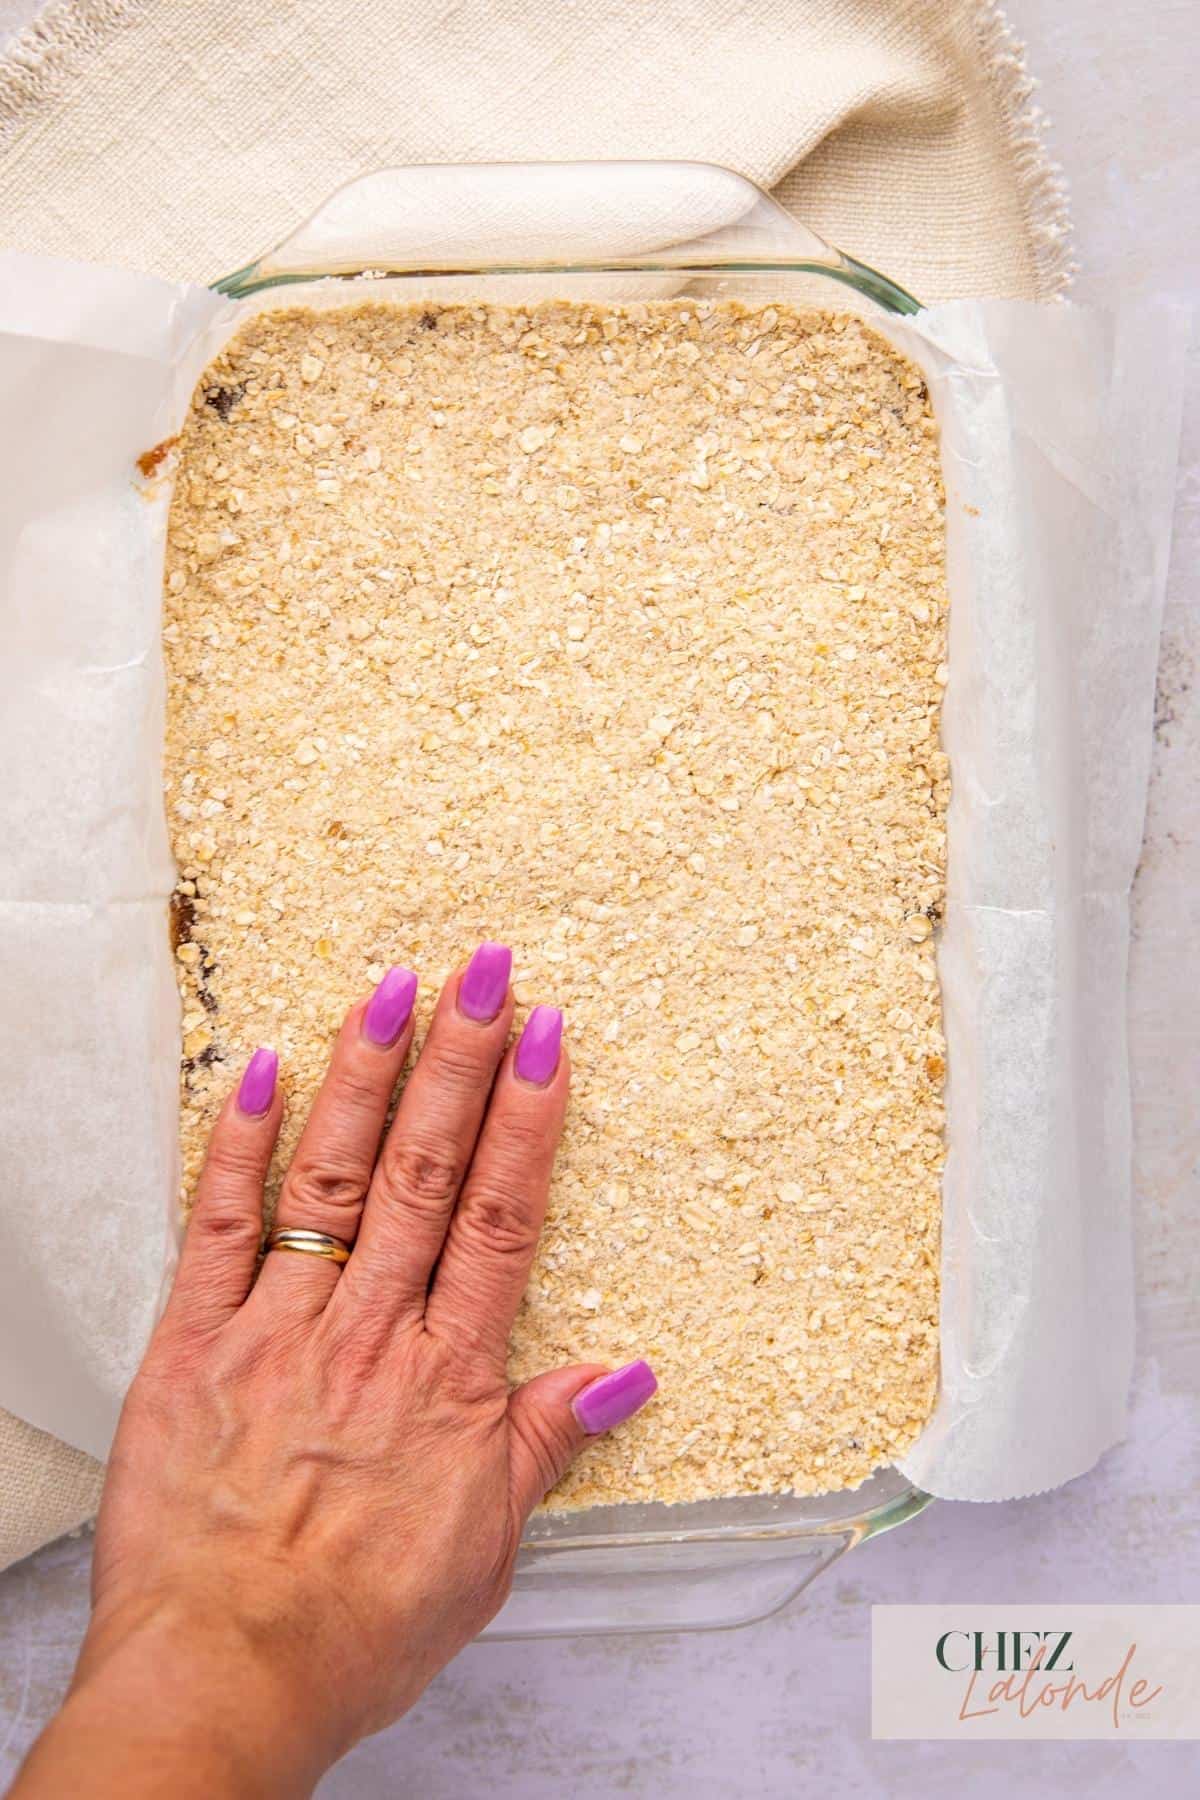 A hand is pressing down oatmeal toppings.